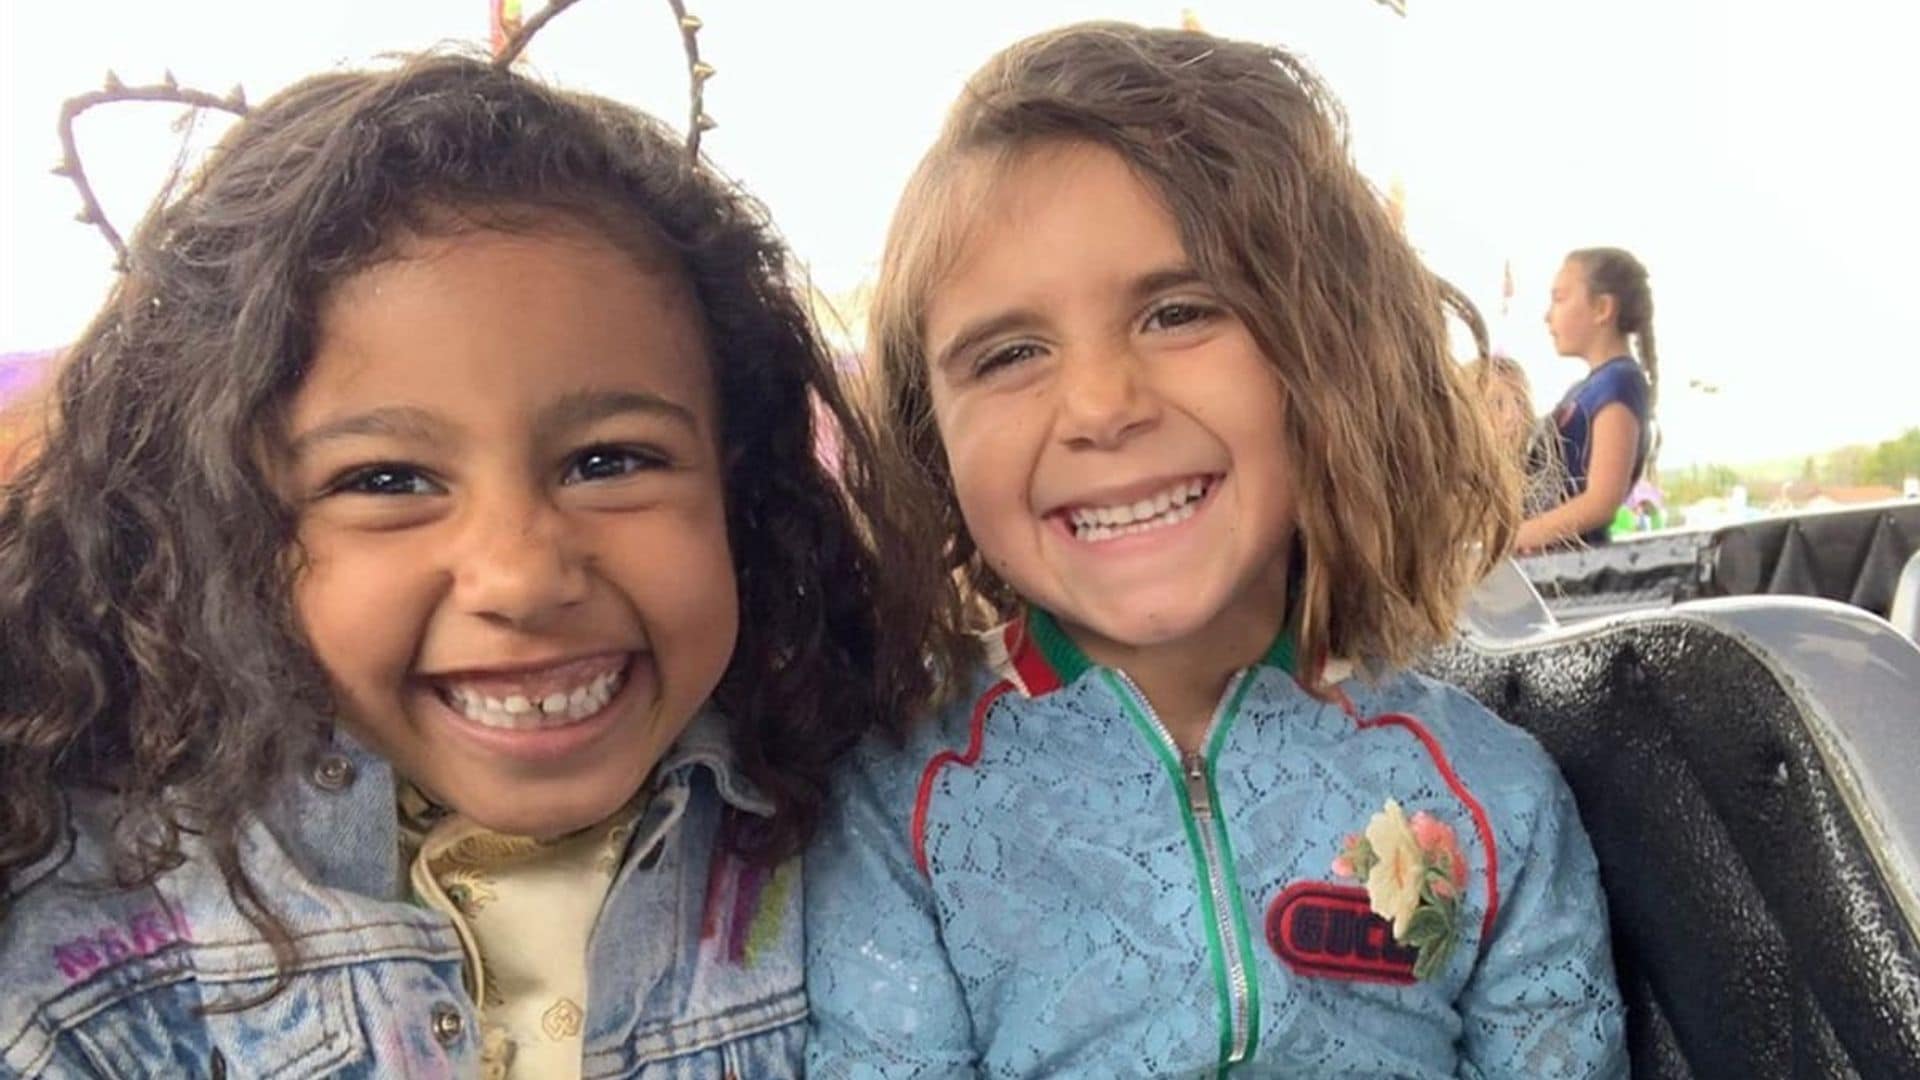 North West and Penelope Disick are already starting their journey as entrepreneurs